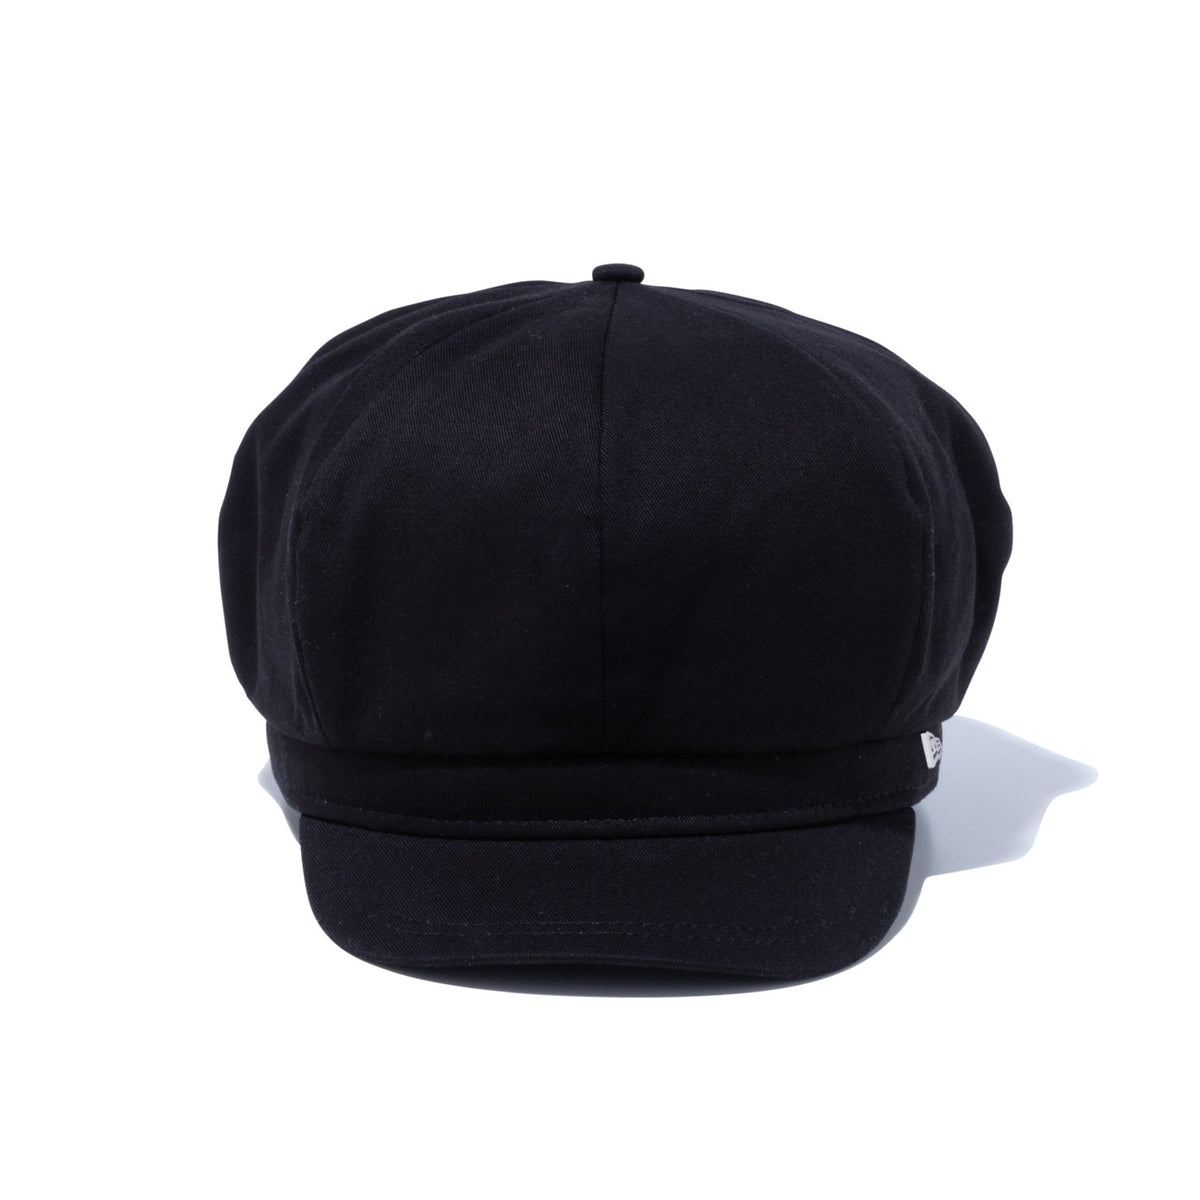 LOCK&CO HATTERS 8P CASCKET NAVY SUEDE 59 - 帽子